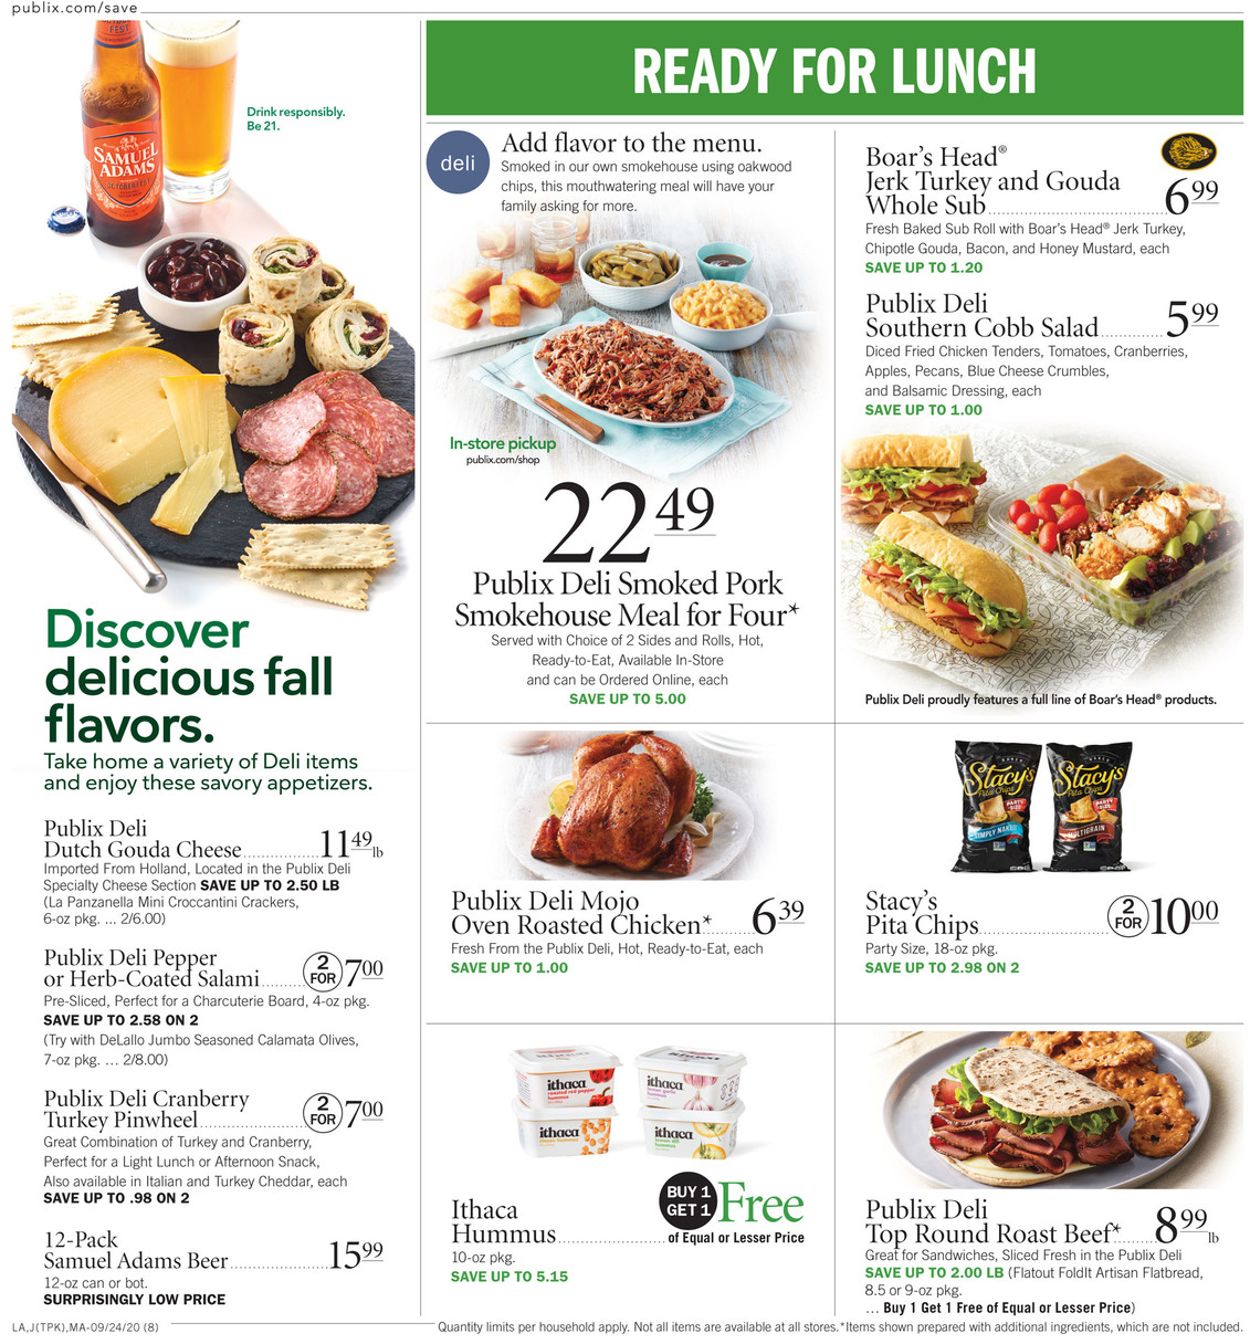 Publix Christmas Meal / Upon your arrival, you may plan your grocery